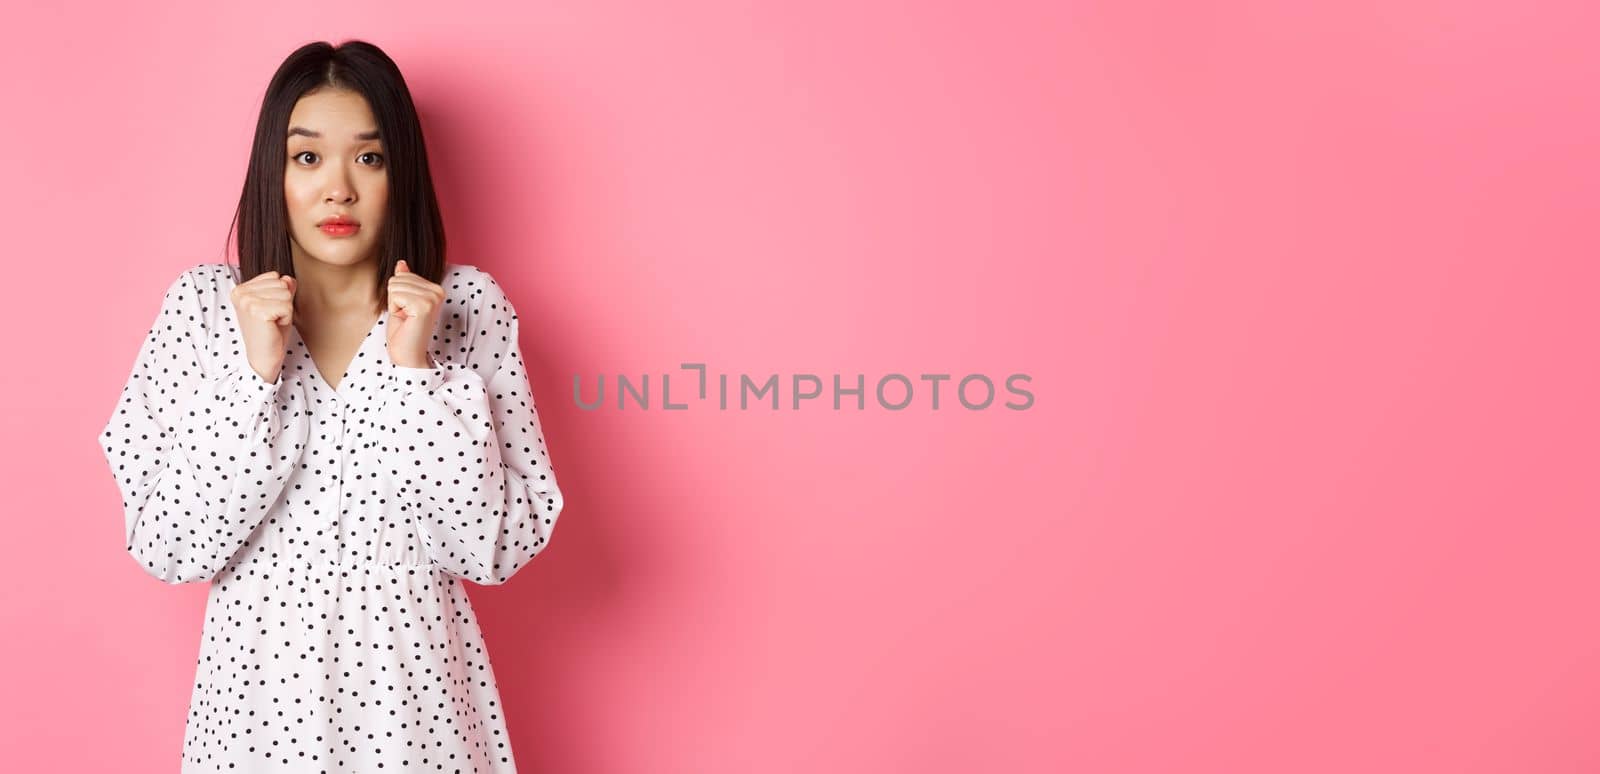 Scared cute asian girl in dress looking worried, feeling frightened and staring at camera nervously, standing over pink background.